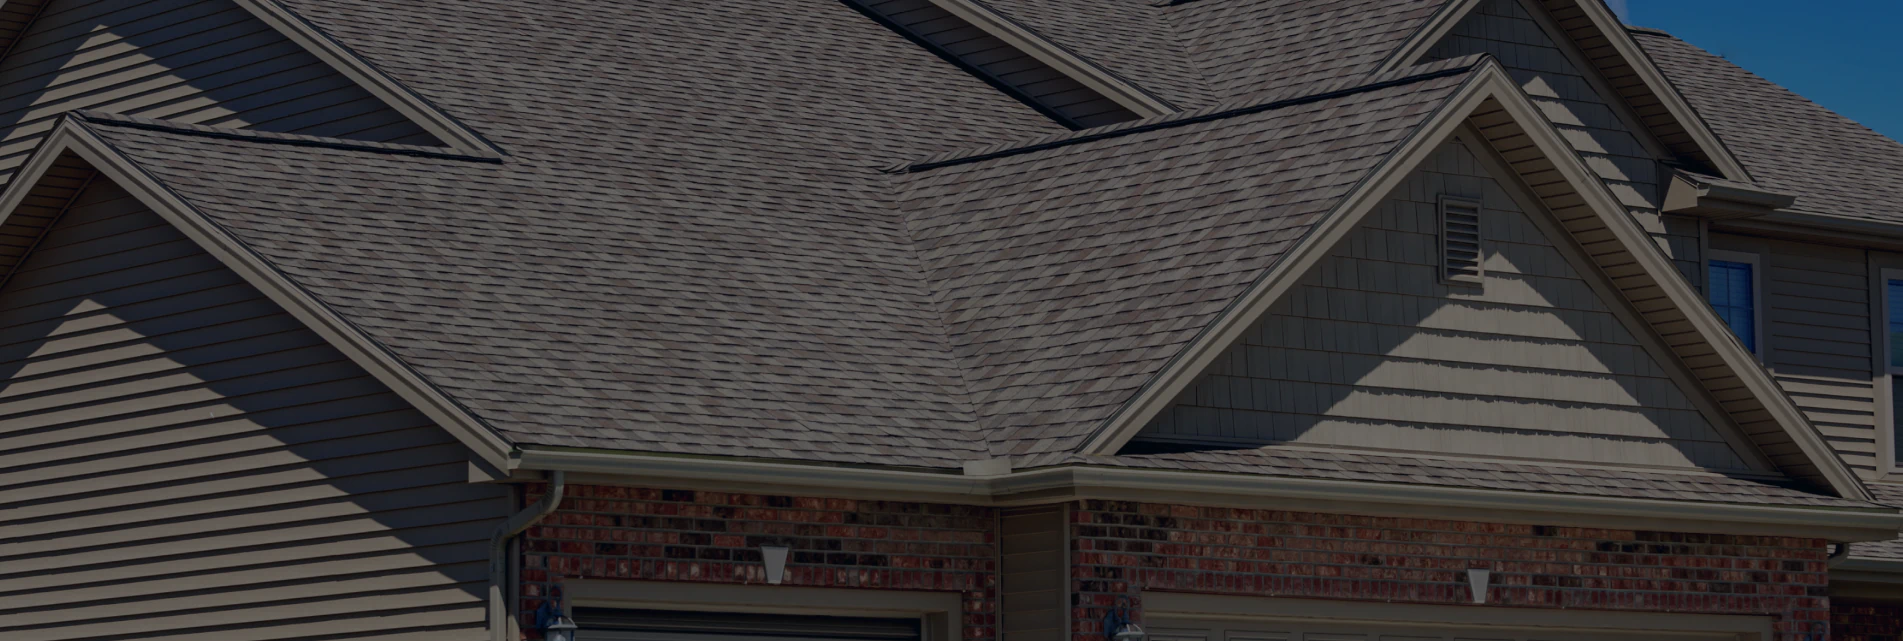 client photo residential house with new asphalt roof shingles